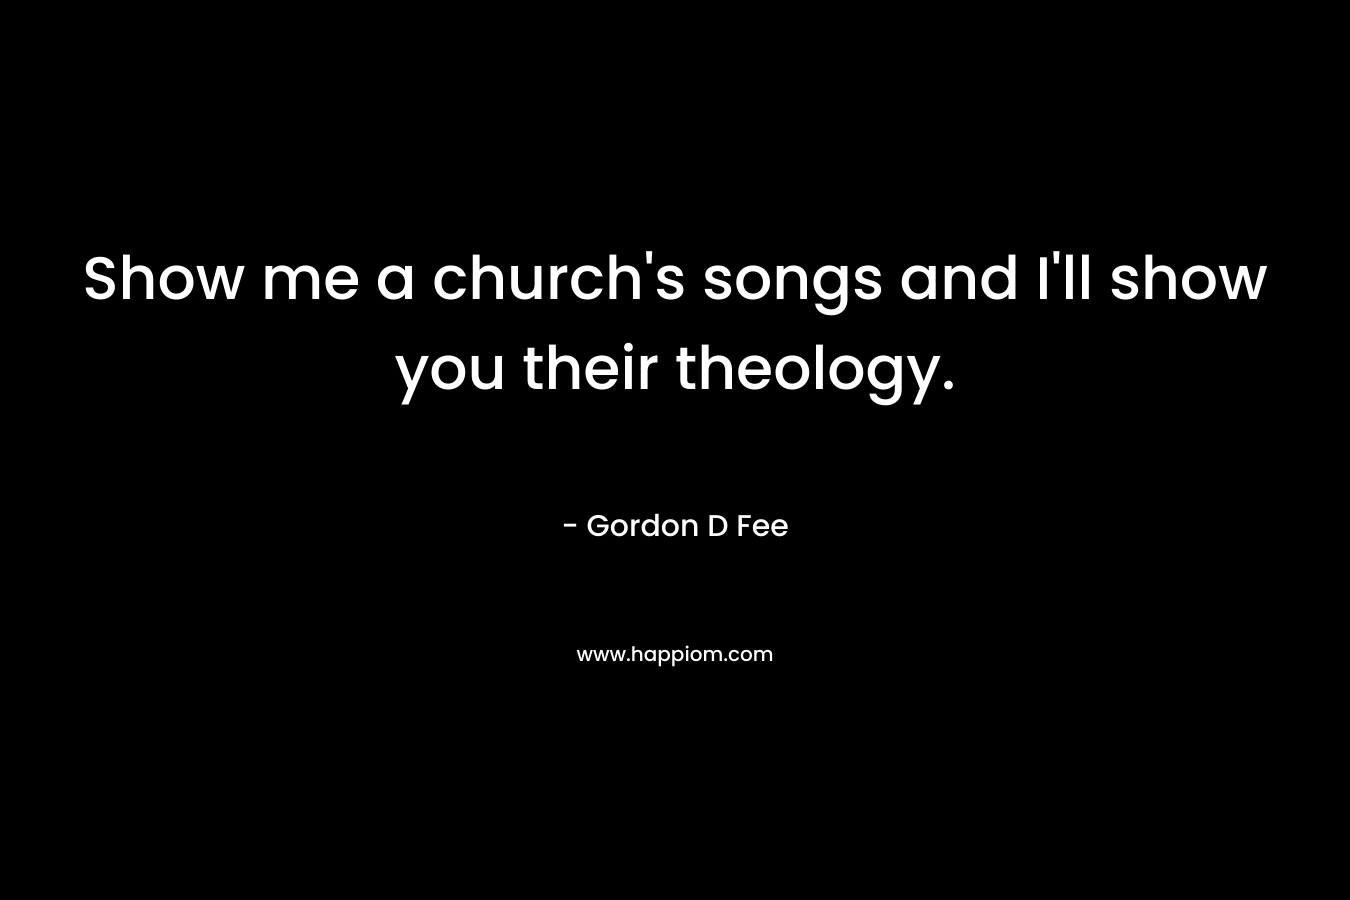 Show me a church’s songs and I’ll show you their theology. – Gordon D Fee